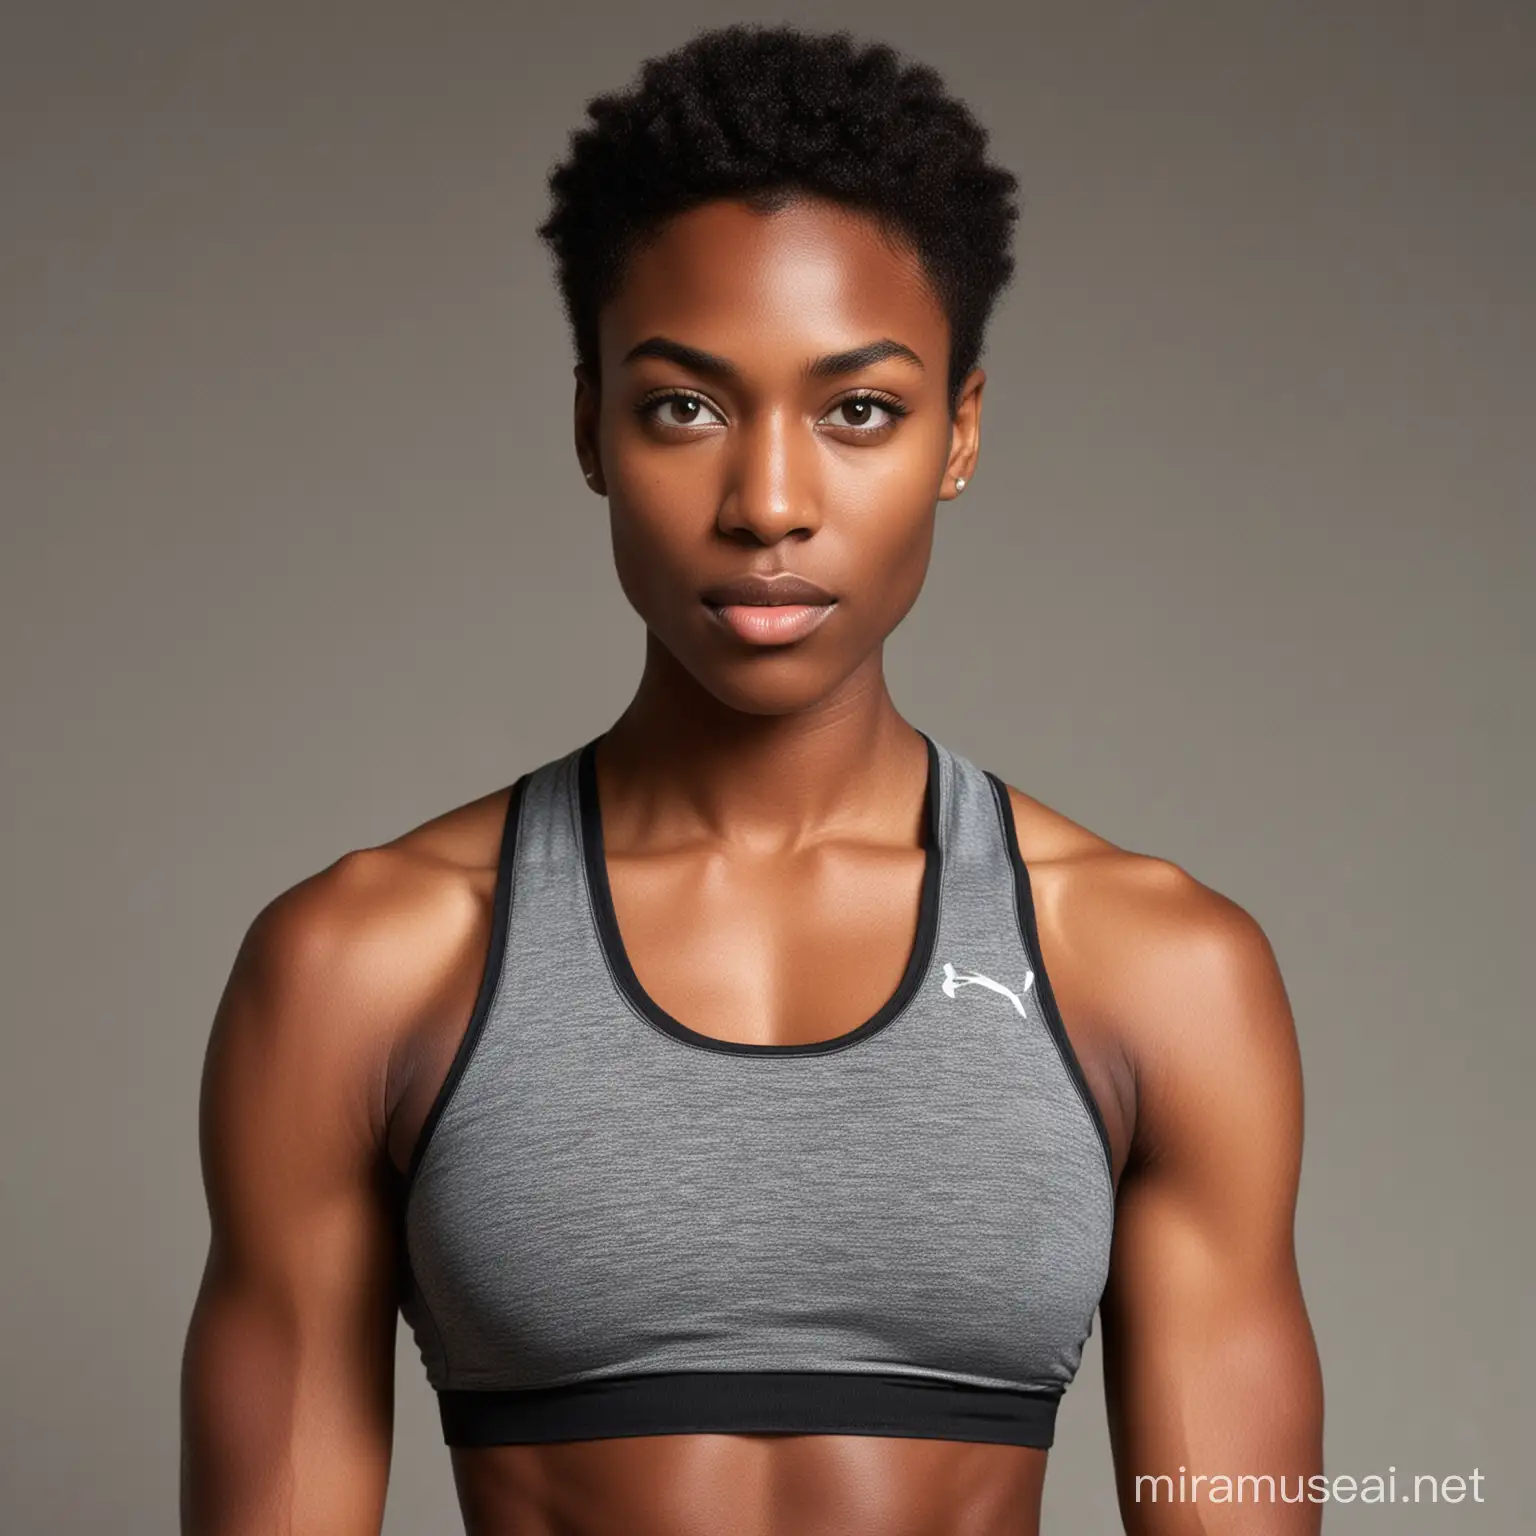 Athletic DarkSkinned Androgynous Individual with Beady Eyes